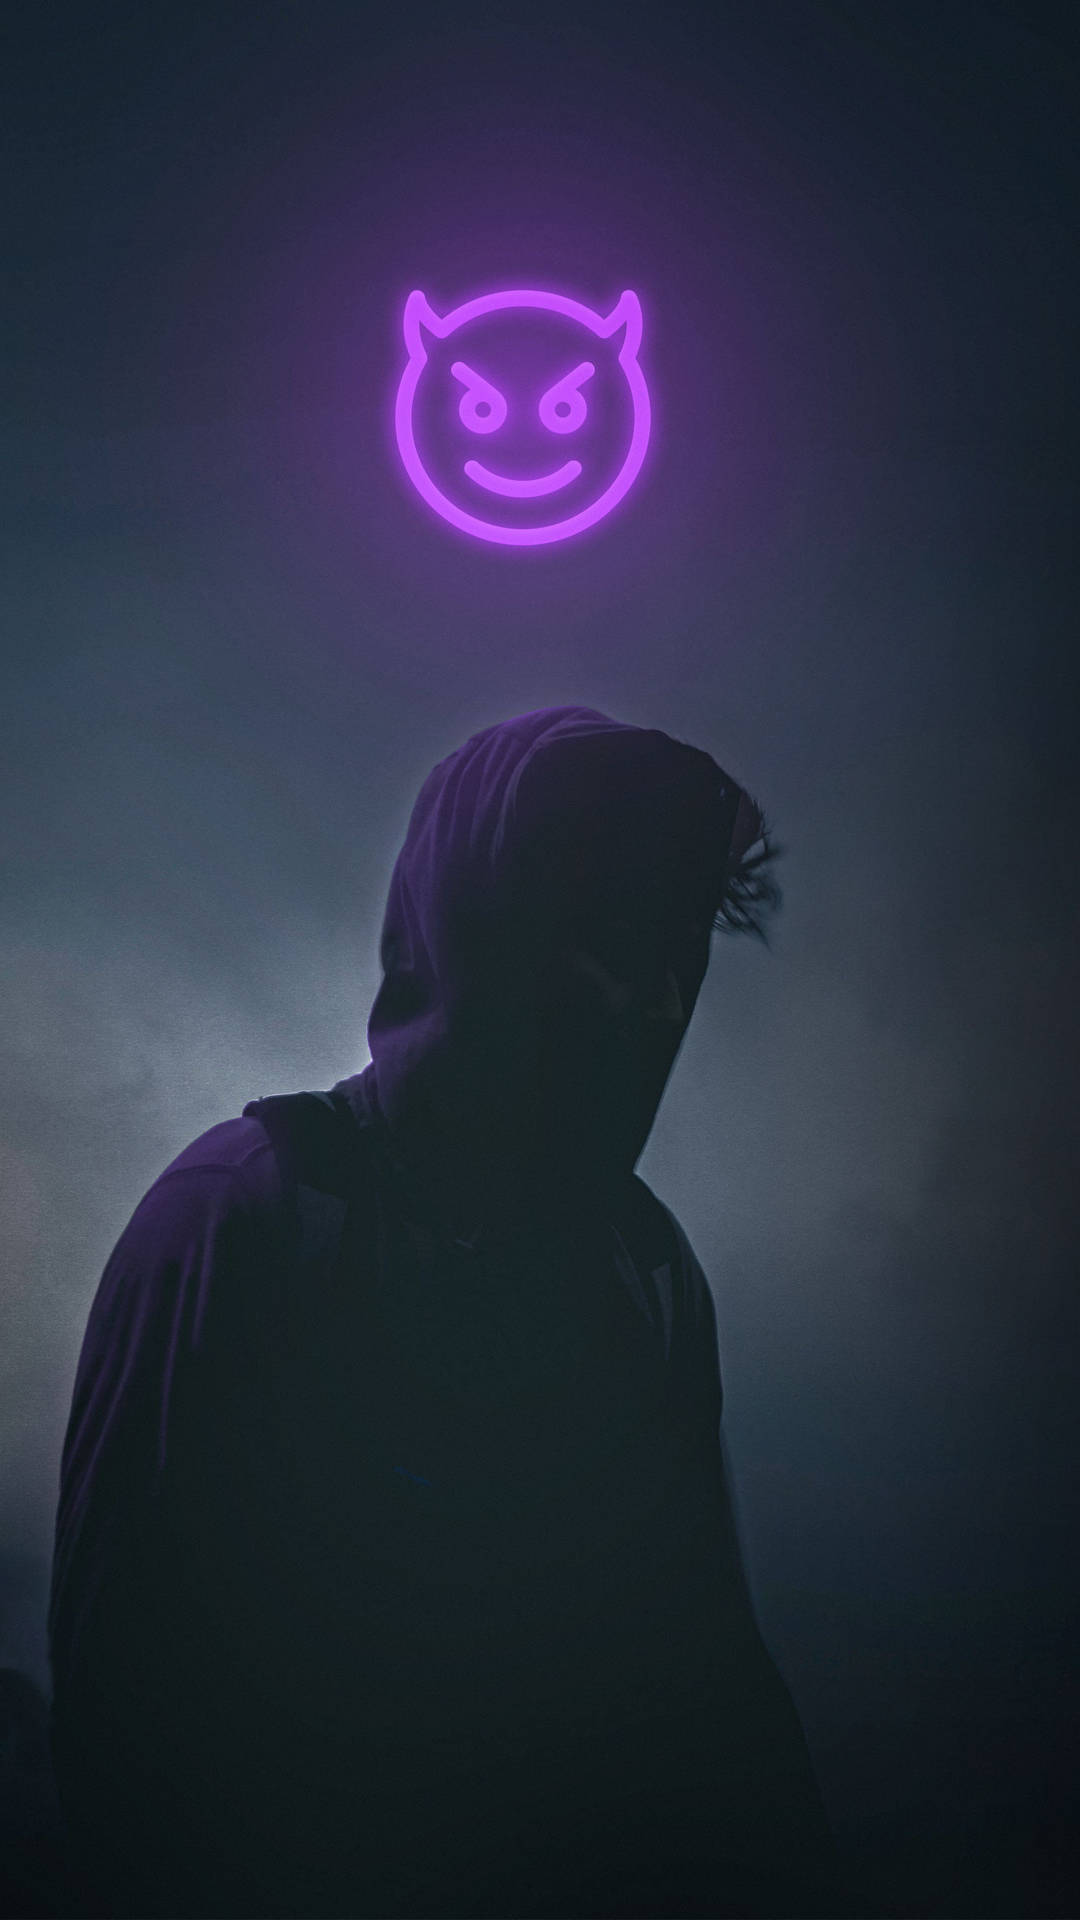 Dark Purple Enigma - Hooded Figure Portraying a Mysterious Aura on the iPhone Wallpaper